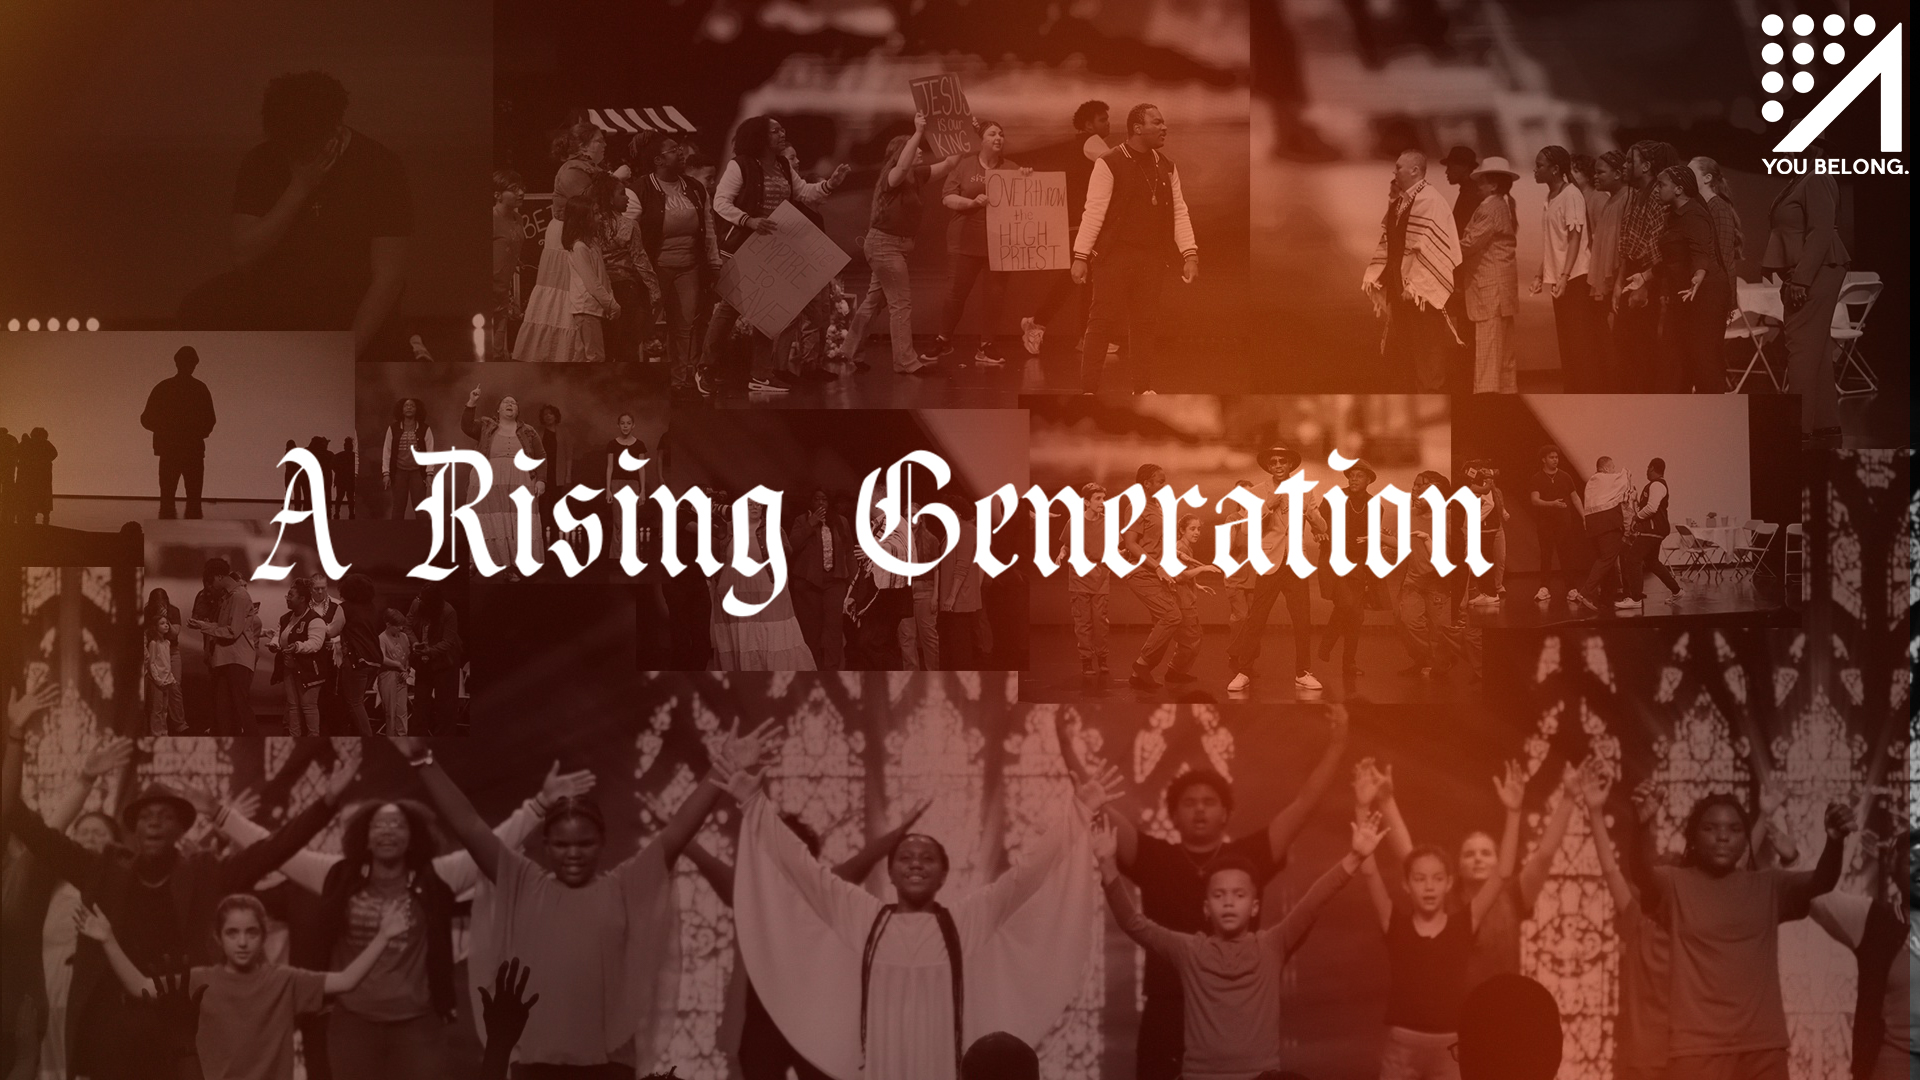 Easter at AFC | A Rising Generation - AFC Original Production